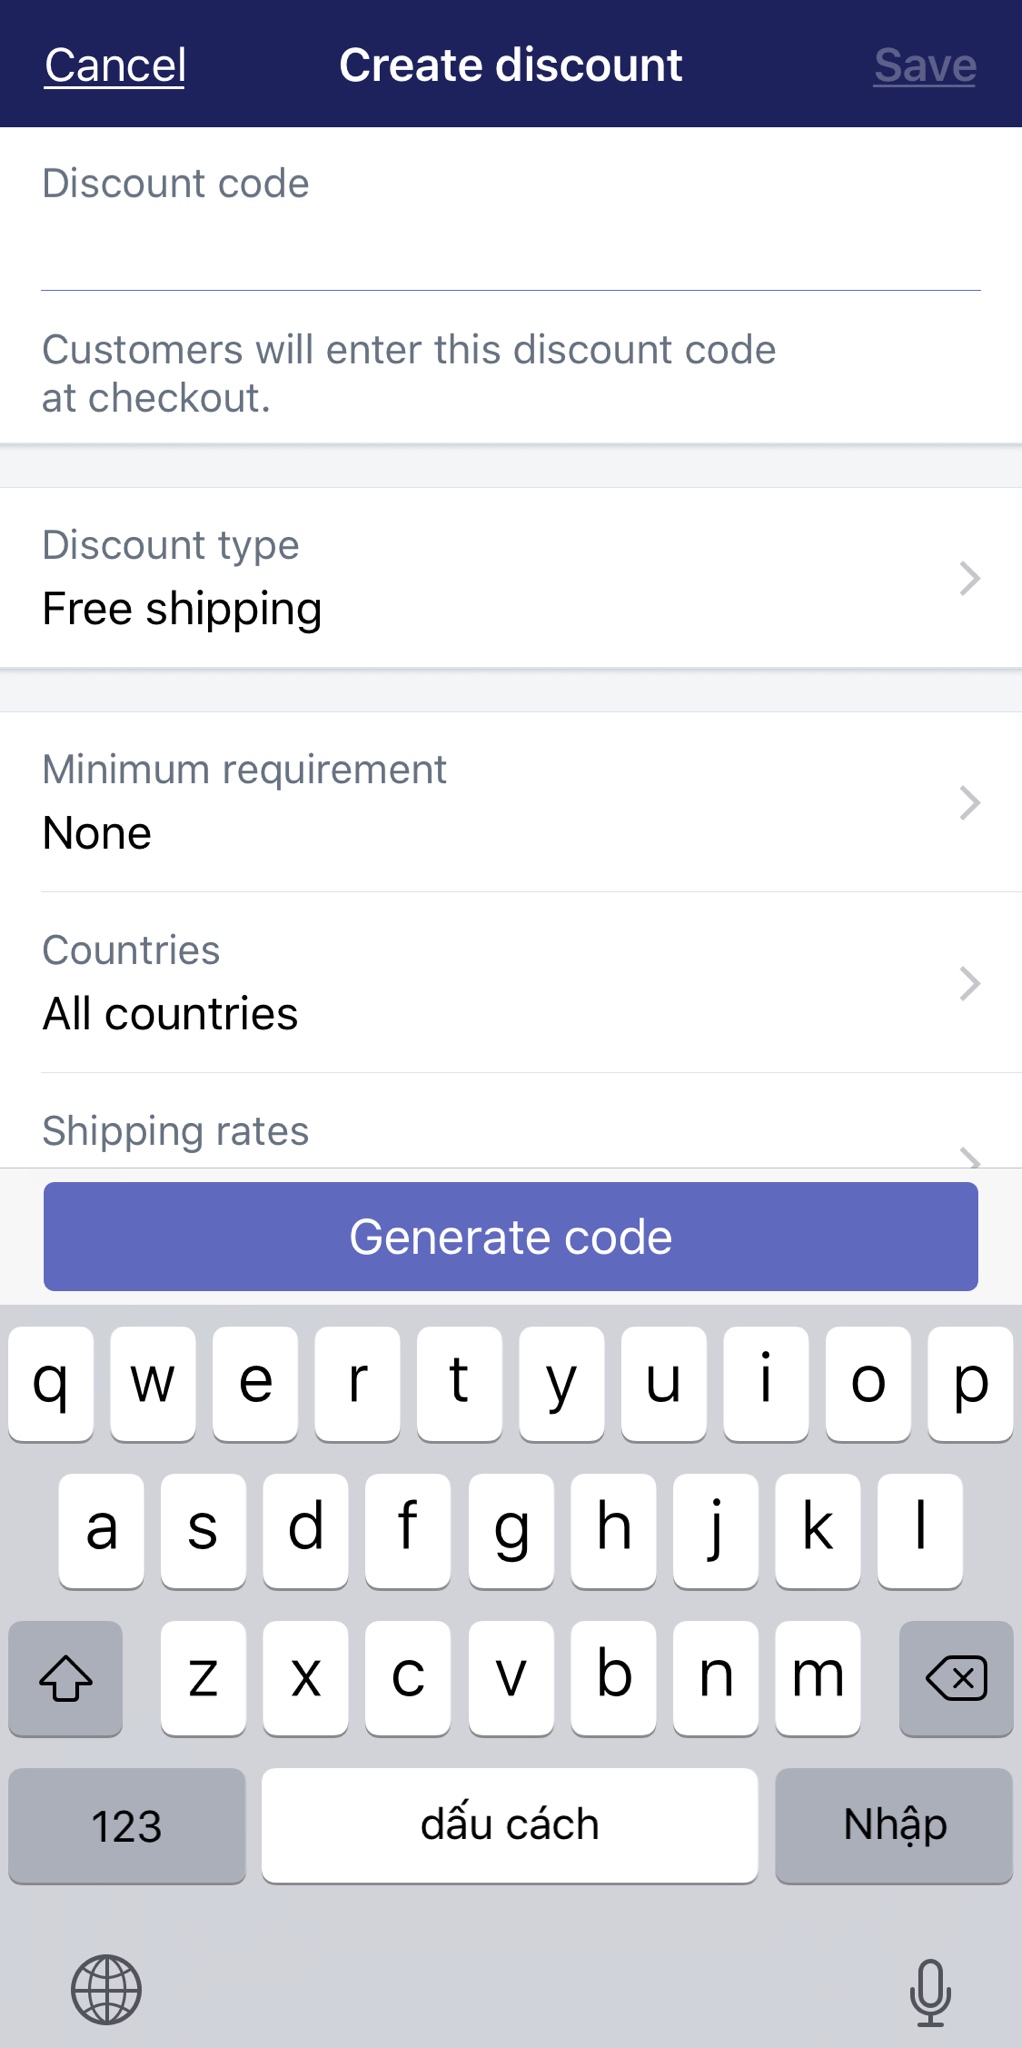 How to create a free shipping discount